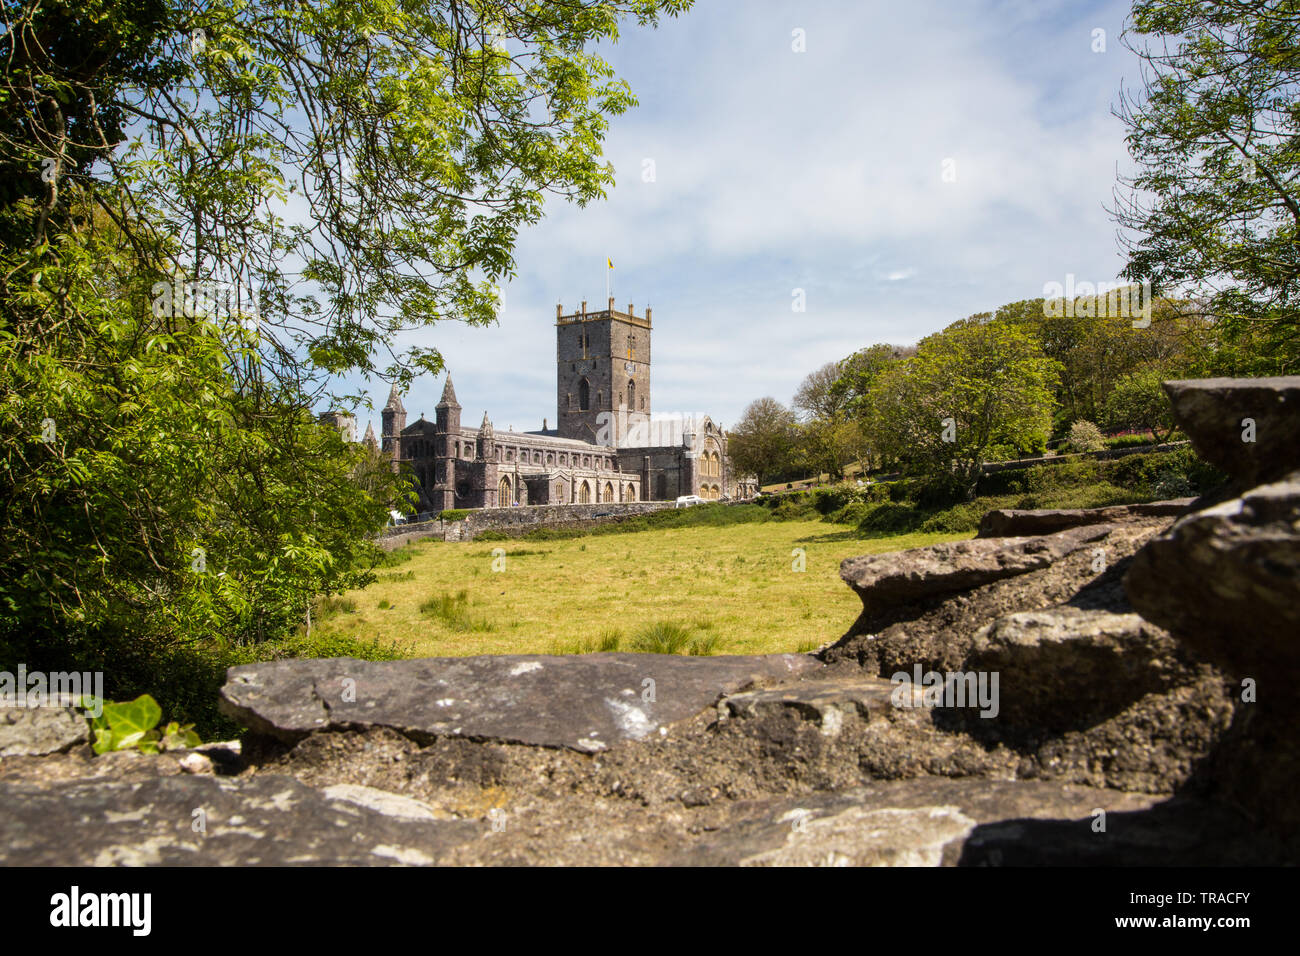 St Davids Cathedral in Pembrokeshire,built by St David the patron saint of Wales the cathedral has been a place of worship for over 800 years. Stock Photo